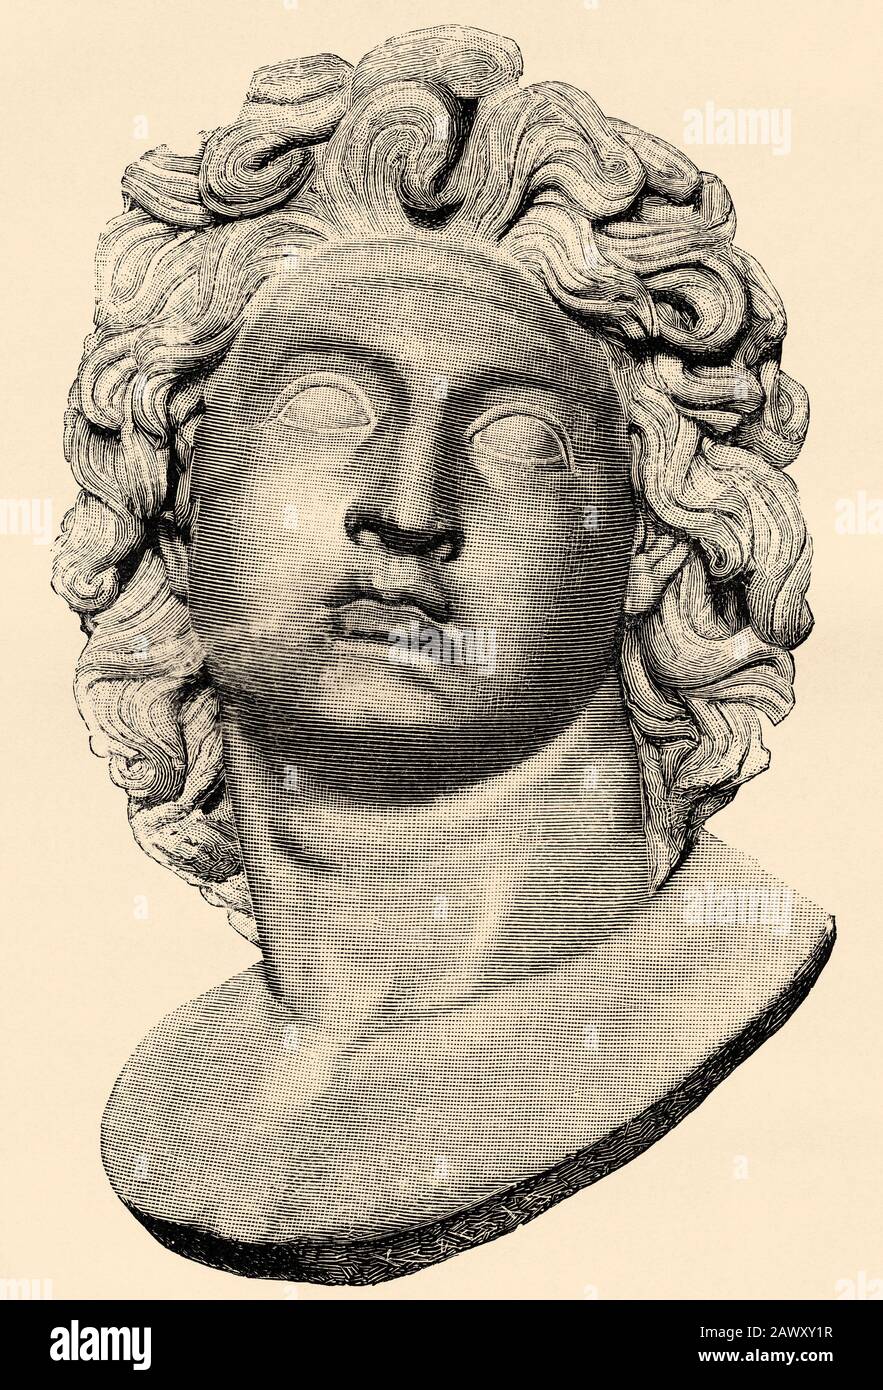 Alexander III of Macedonia (Pela, Greece 356 BC - Babylon 323 BC). Better known as Alexander the Great or Alexander the Great was King of Macedonia, H Stock Photo